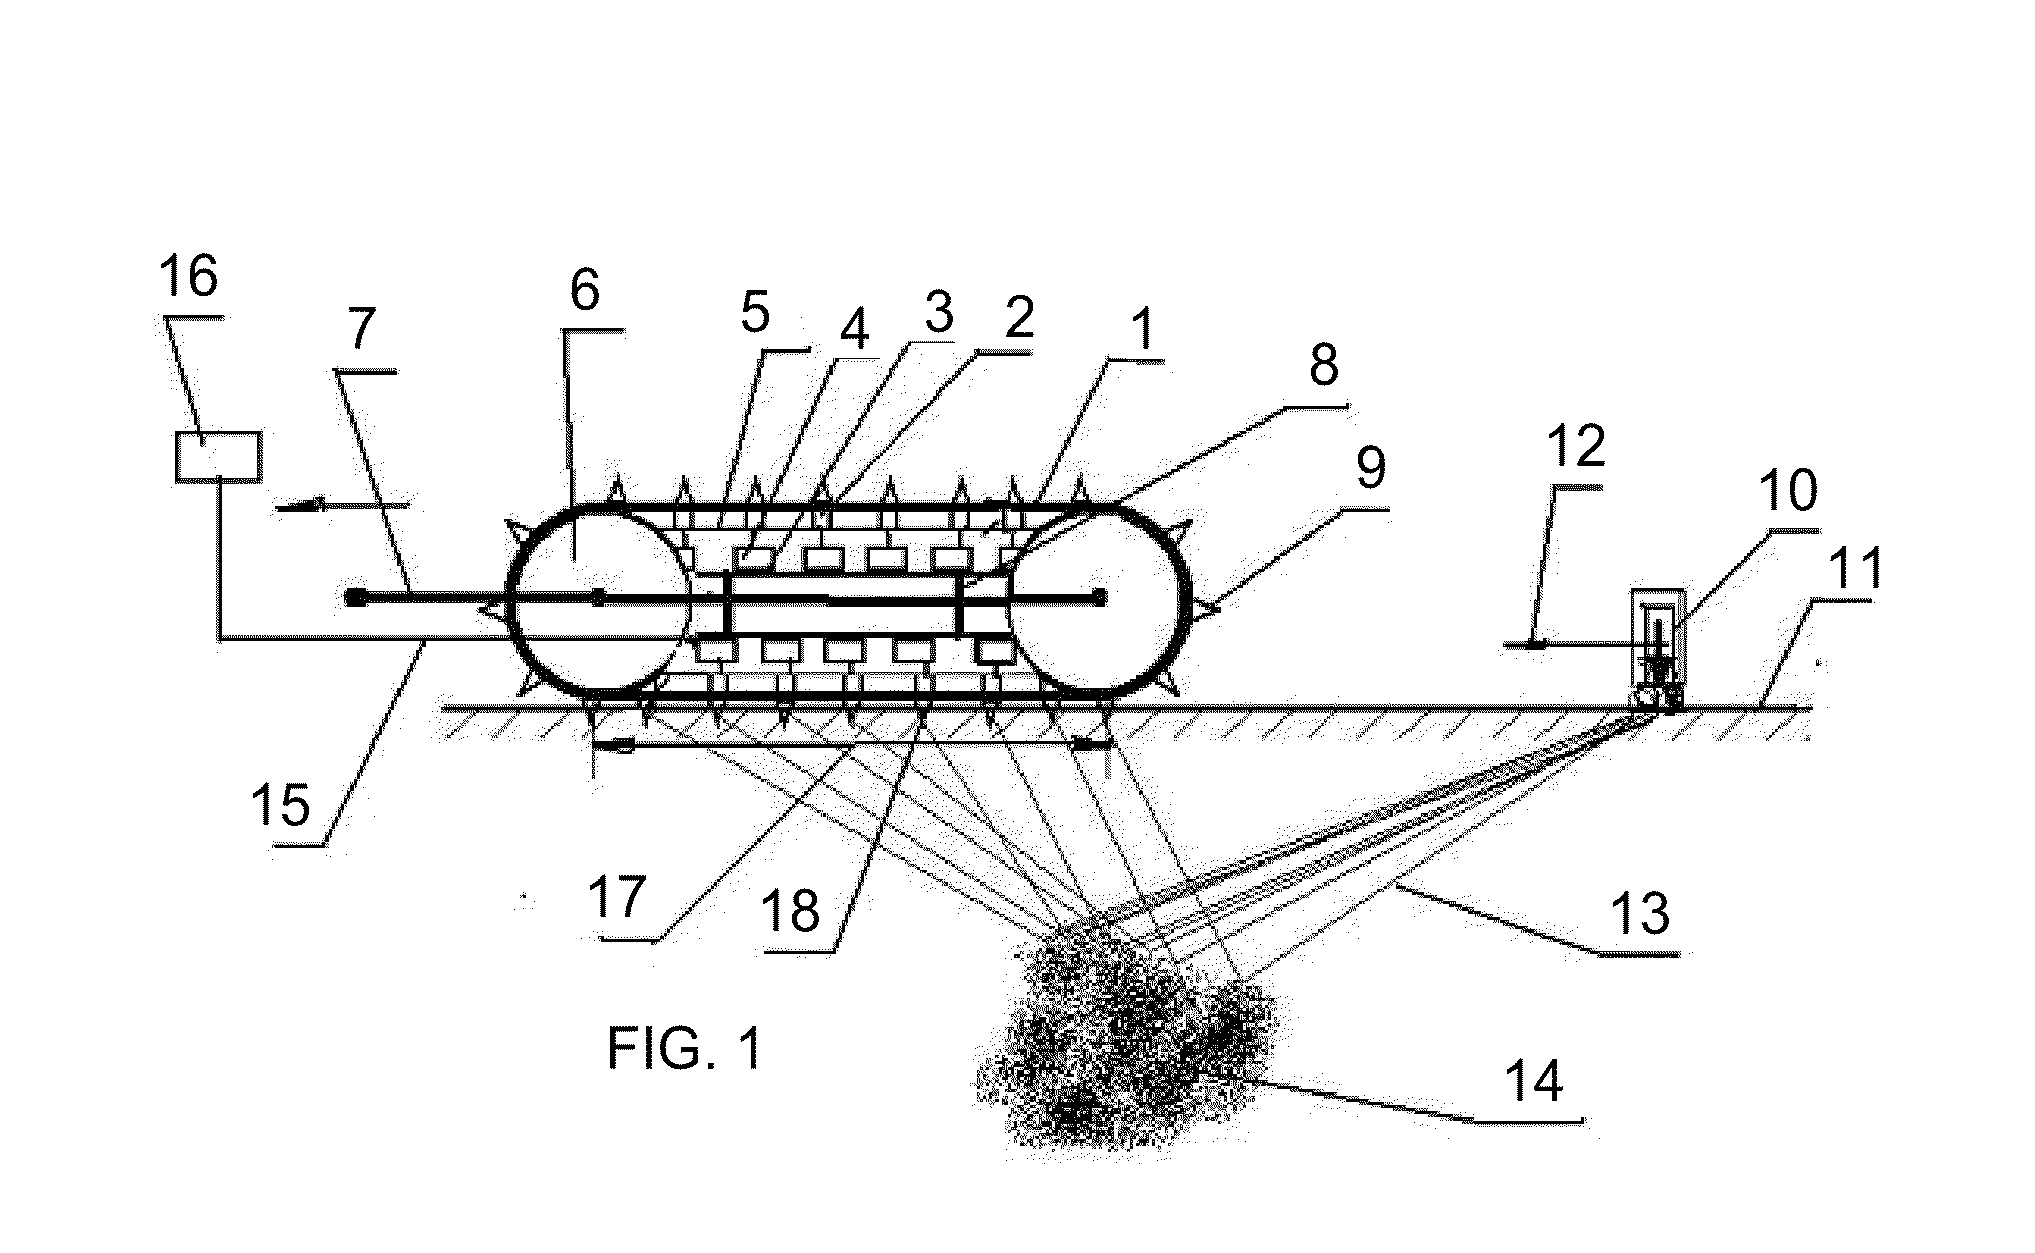 Seismic sensor array devices and methods of data collection